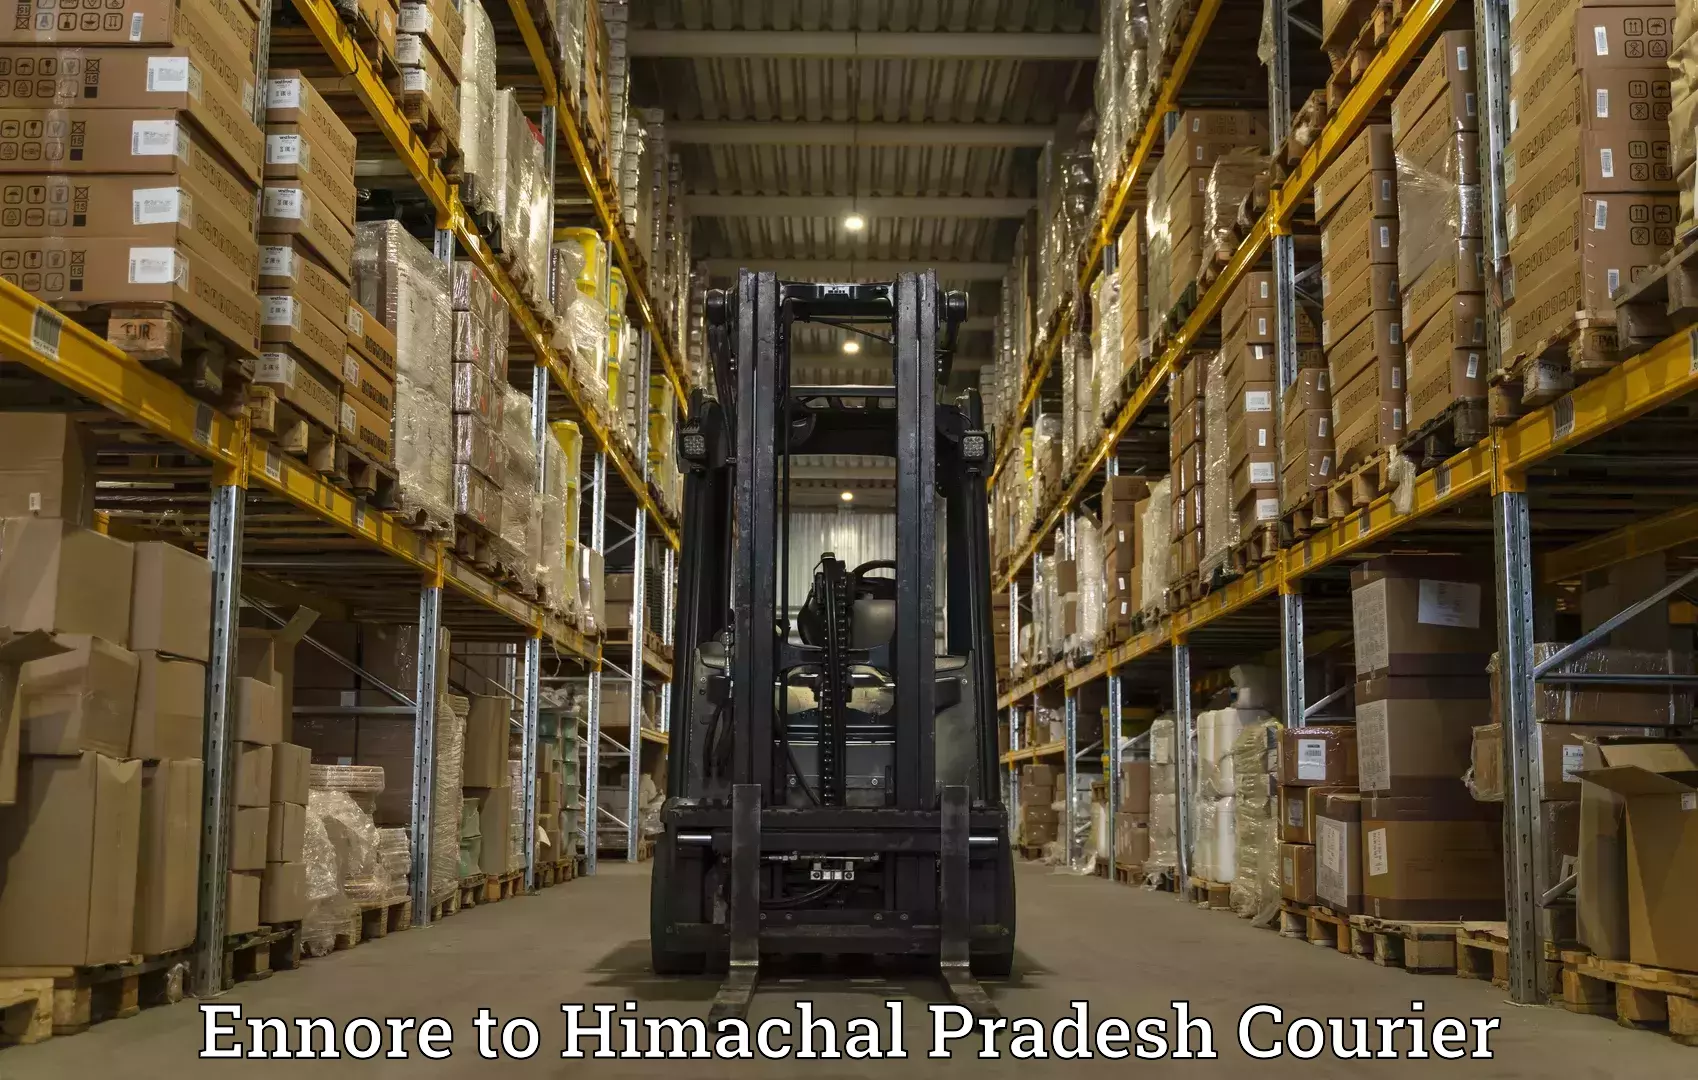 Courier service innovation Ennore to Una Himachal Pradesh